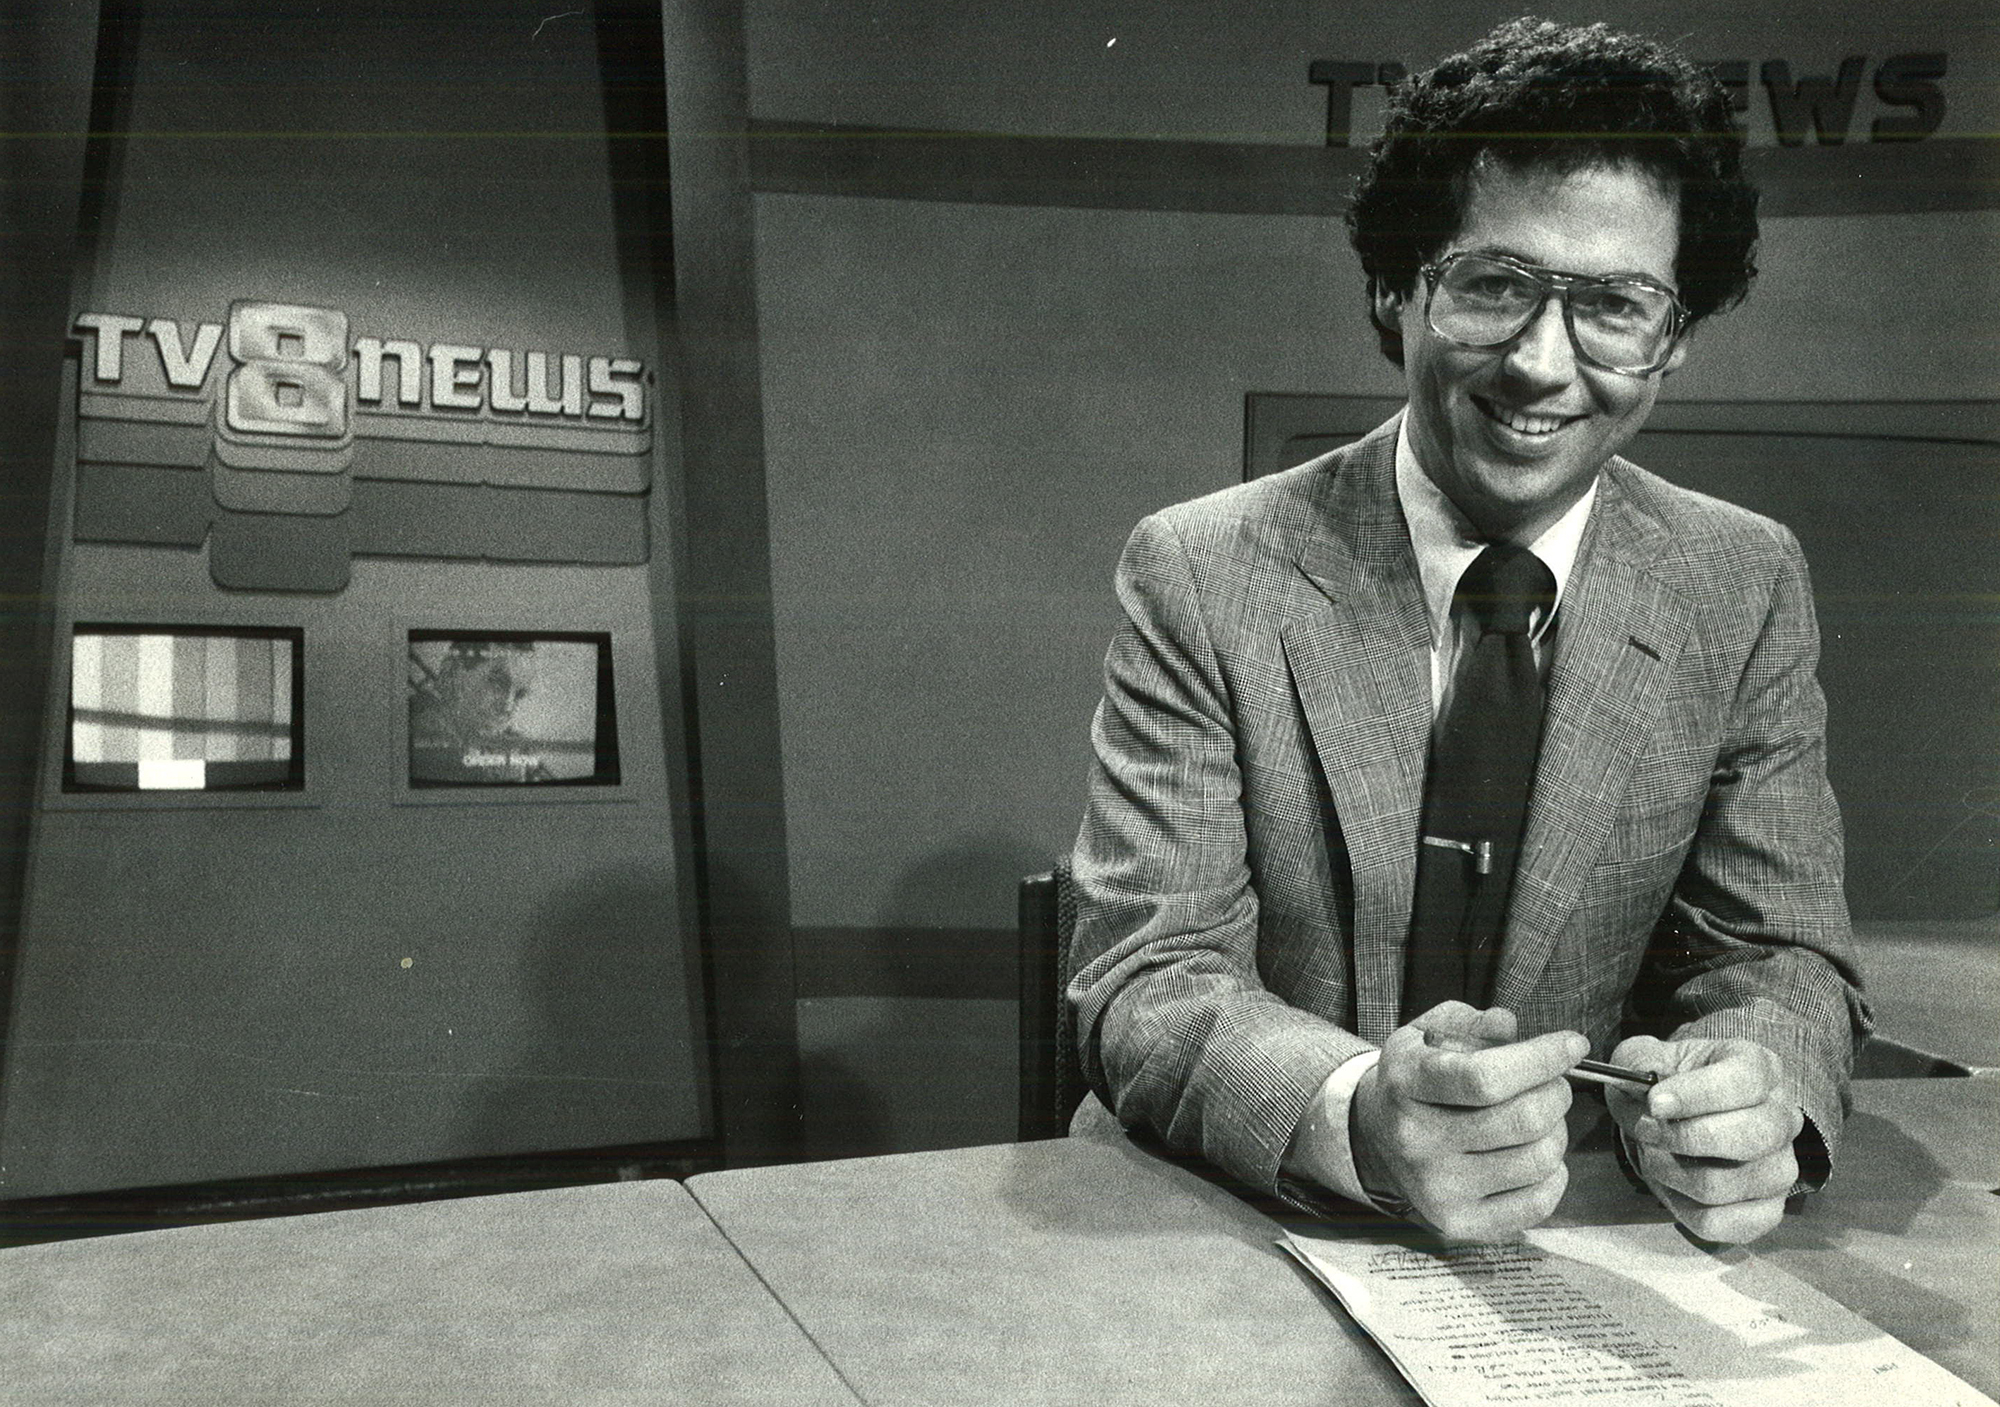 Kevin Cooney worked at KCCI-TV for 33 years and is shown in the newsroom in the 1980s. Photo courtesy of The Des Moines Register